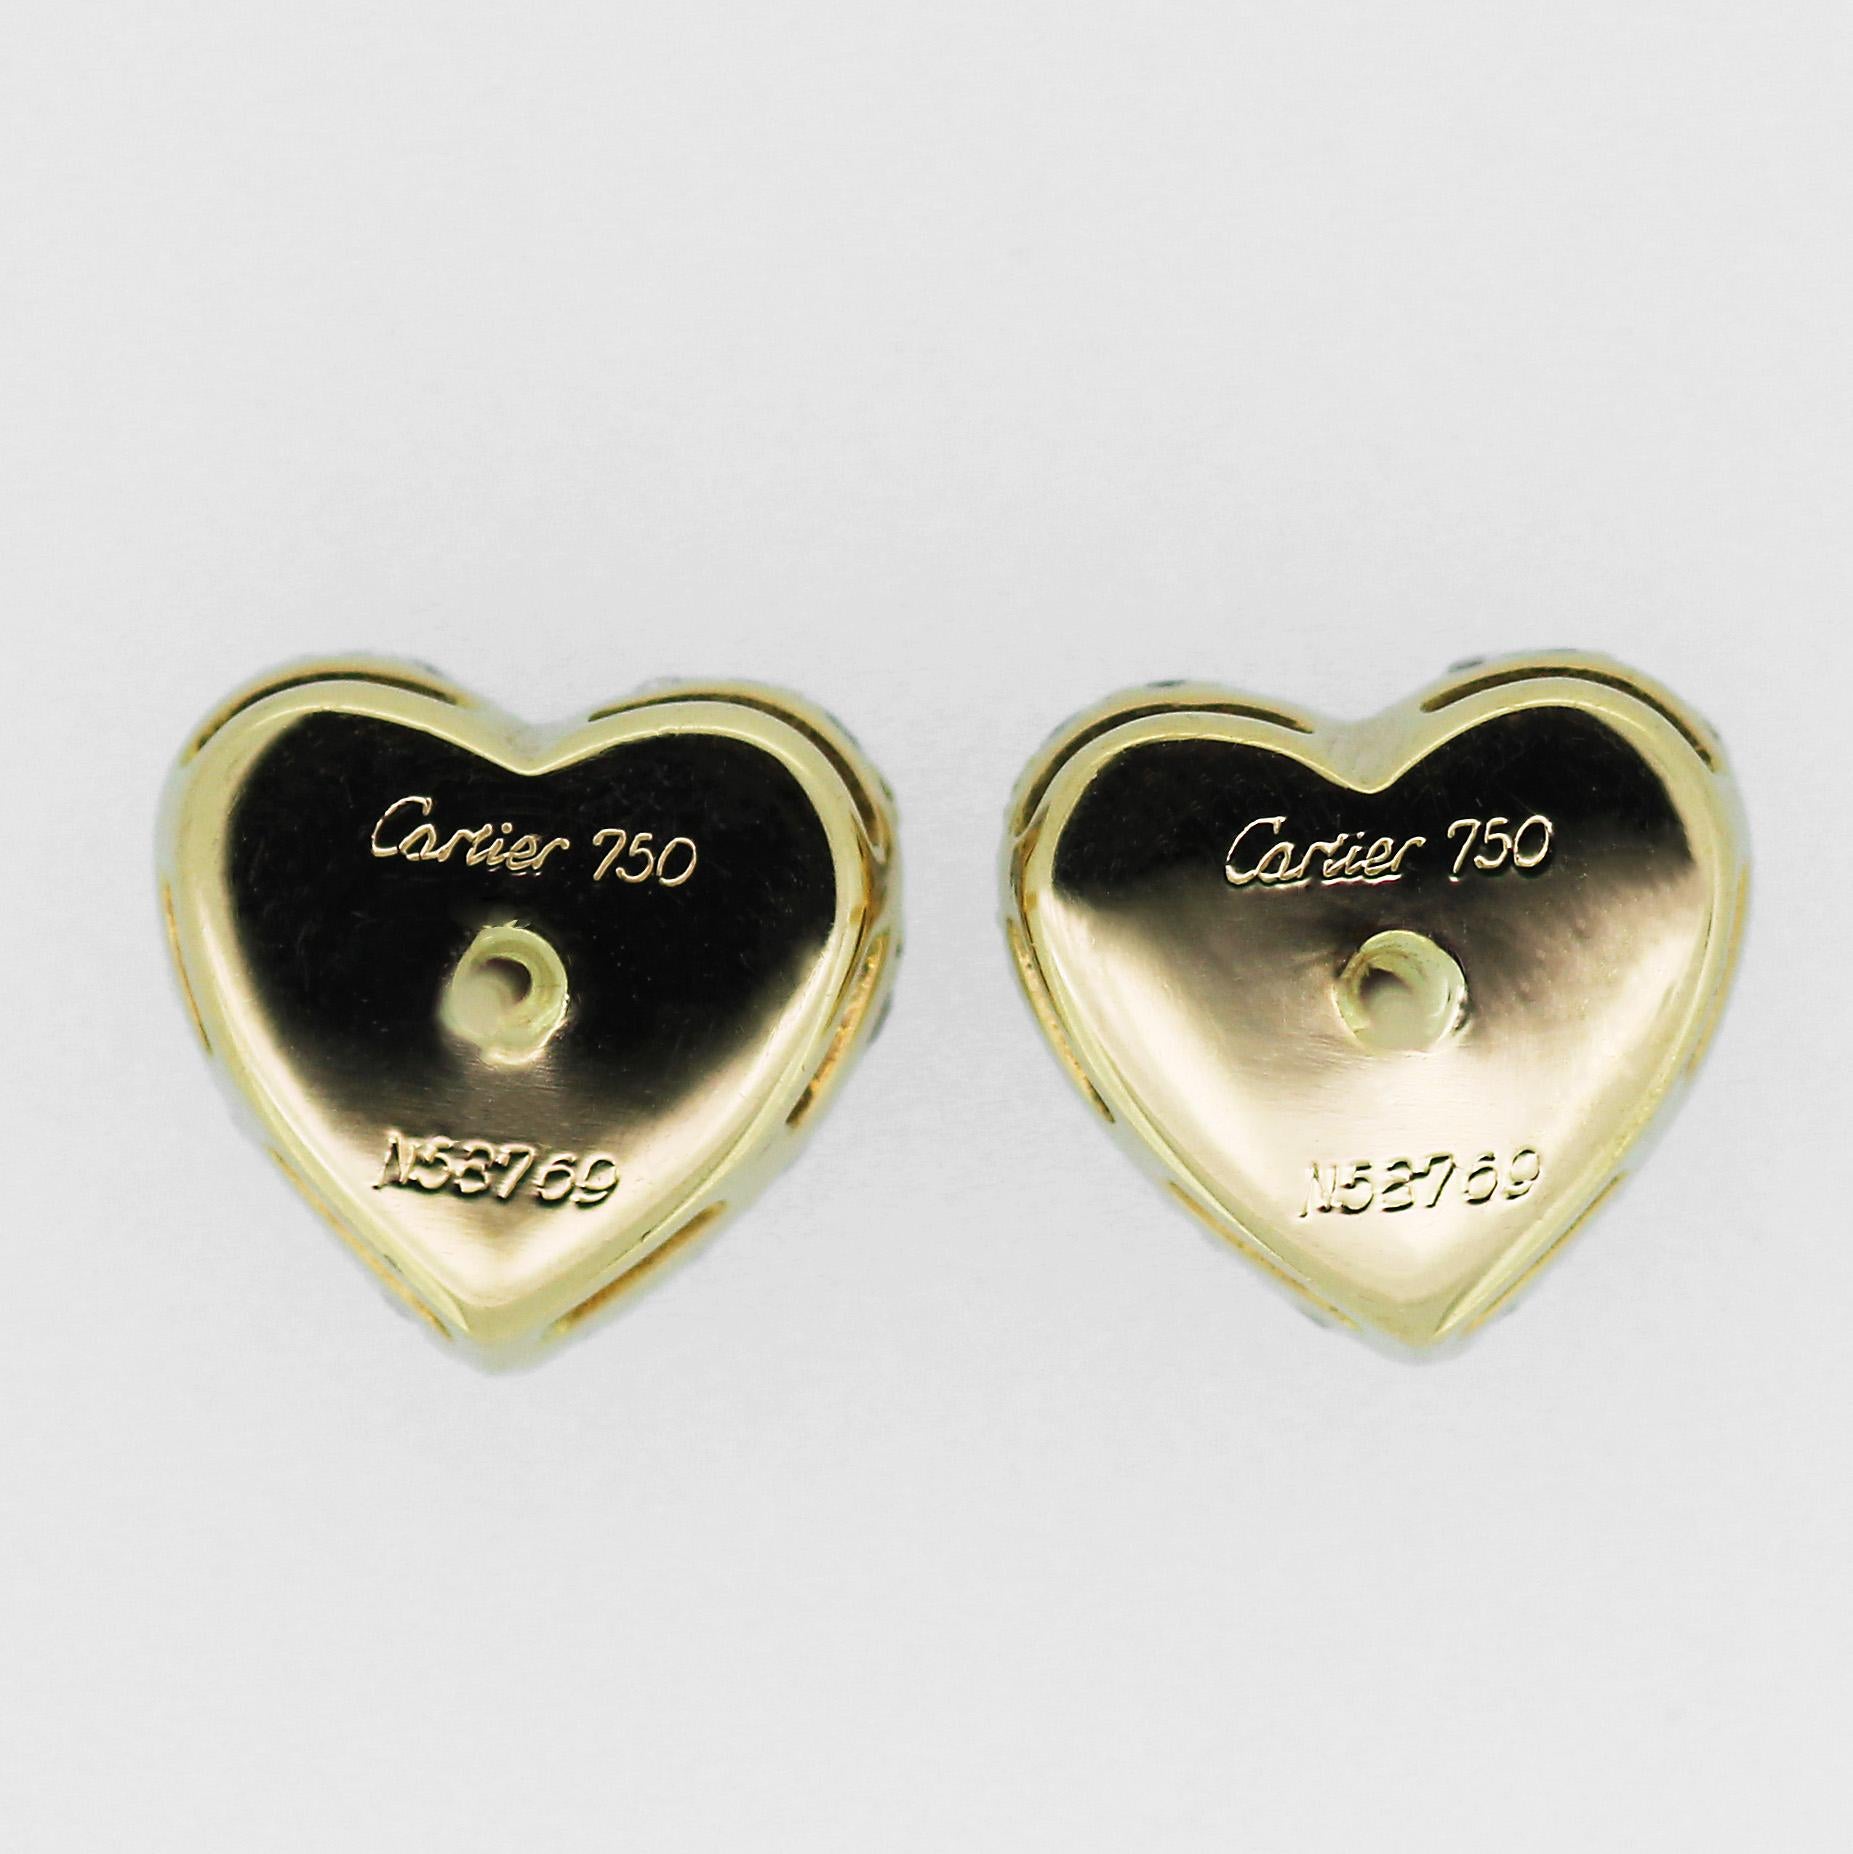 Round Cut Cartier Diamond Love Heart Earrings and Ring in 18 Karat Gold